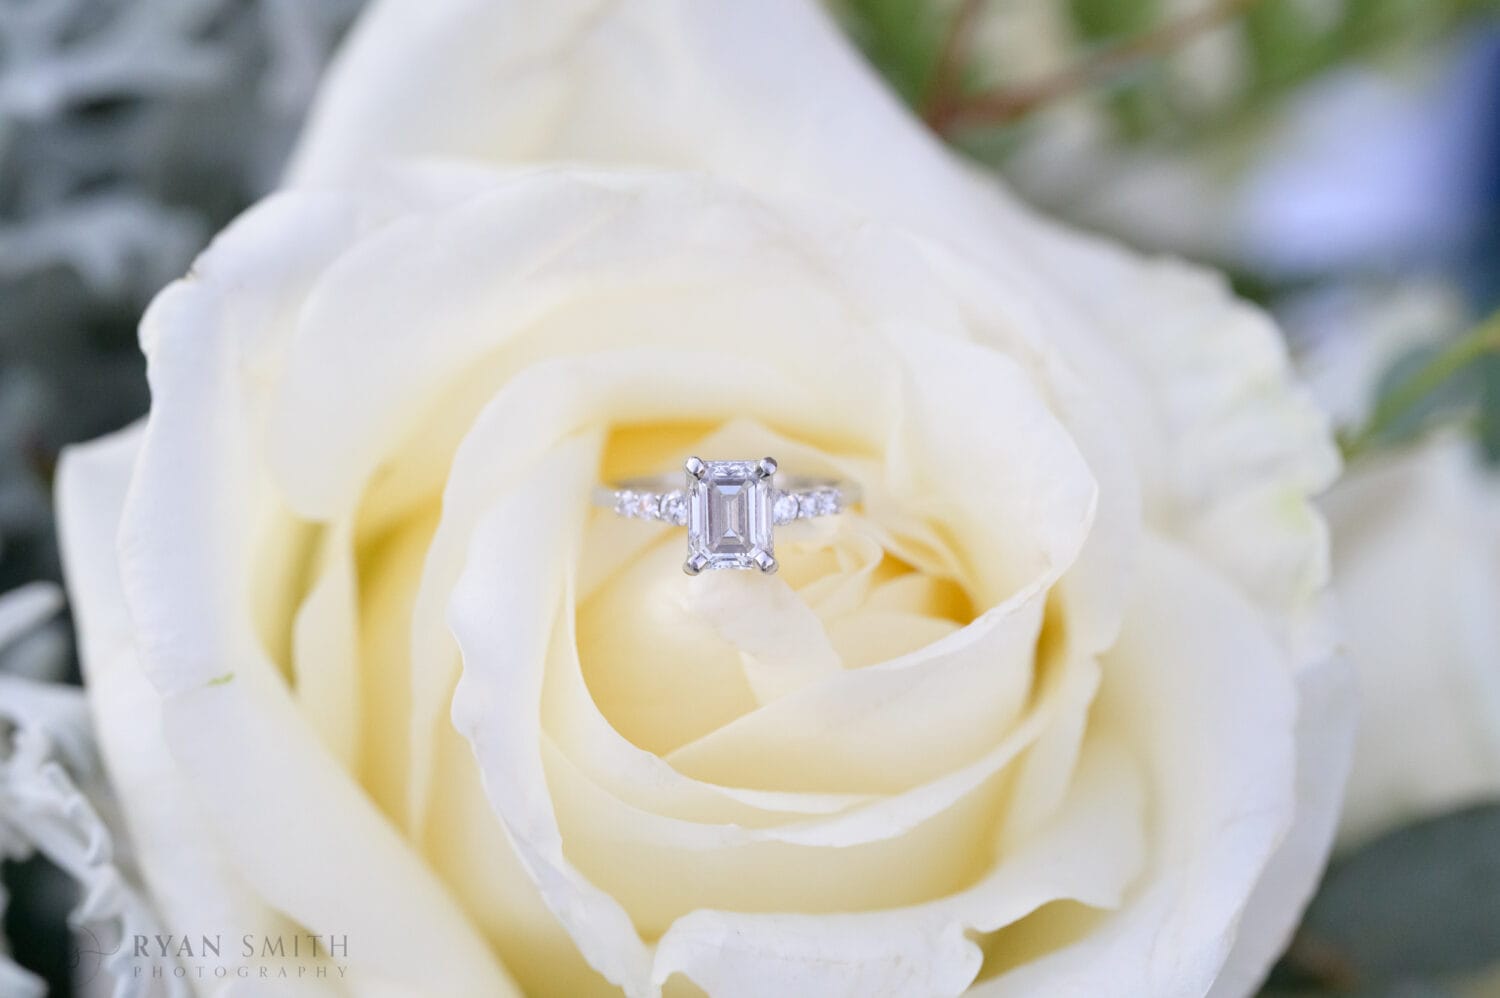 Brides ring on the flower - Safe Harbor Reserve Harbor Yacht Club